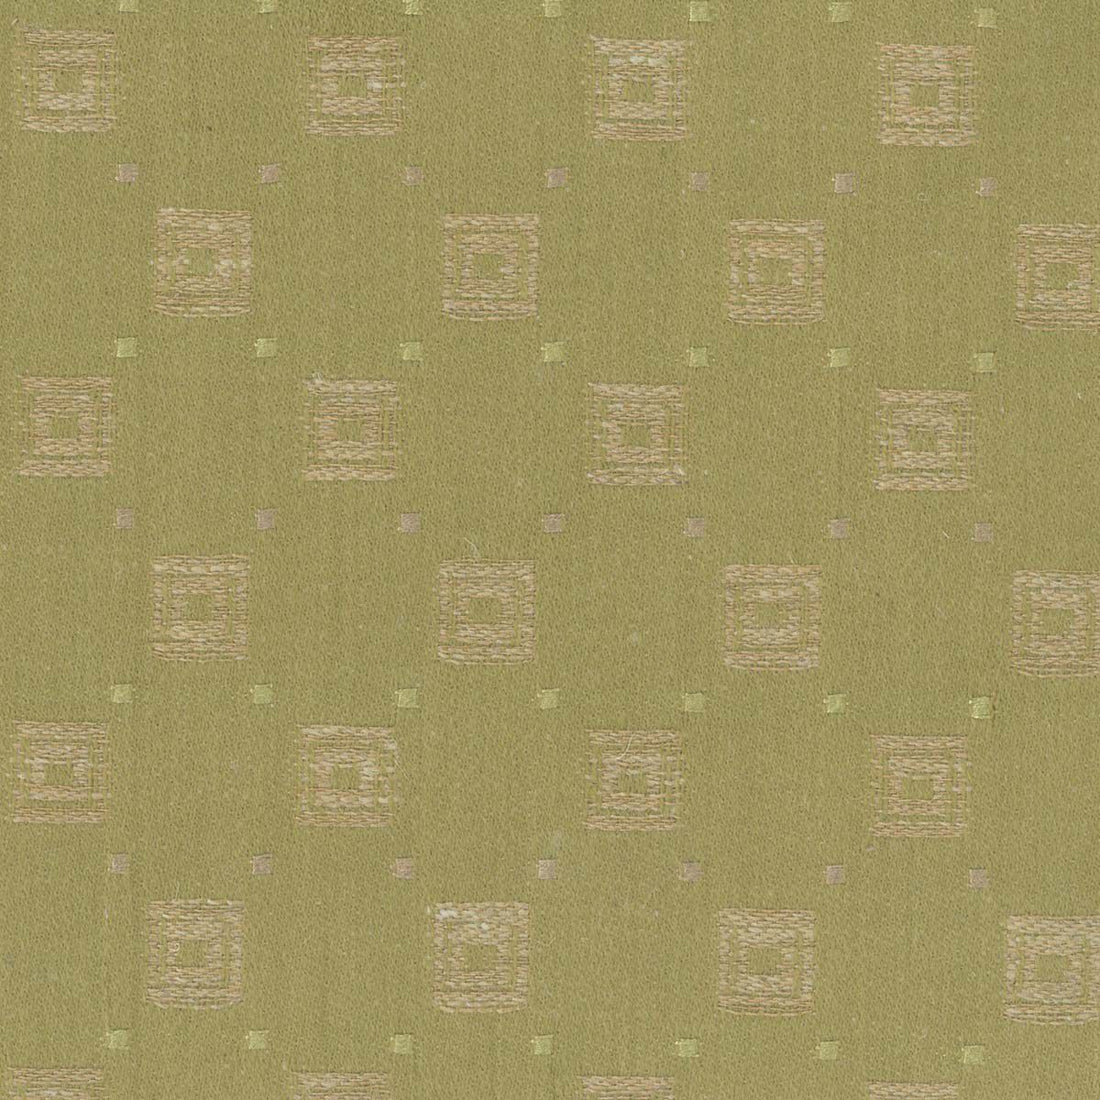 Livingston fabric in absinthe color - pattern number RV 00031469 - by Scalamandre in the Old World Weavers collection